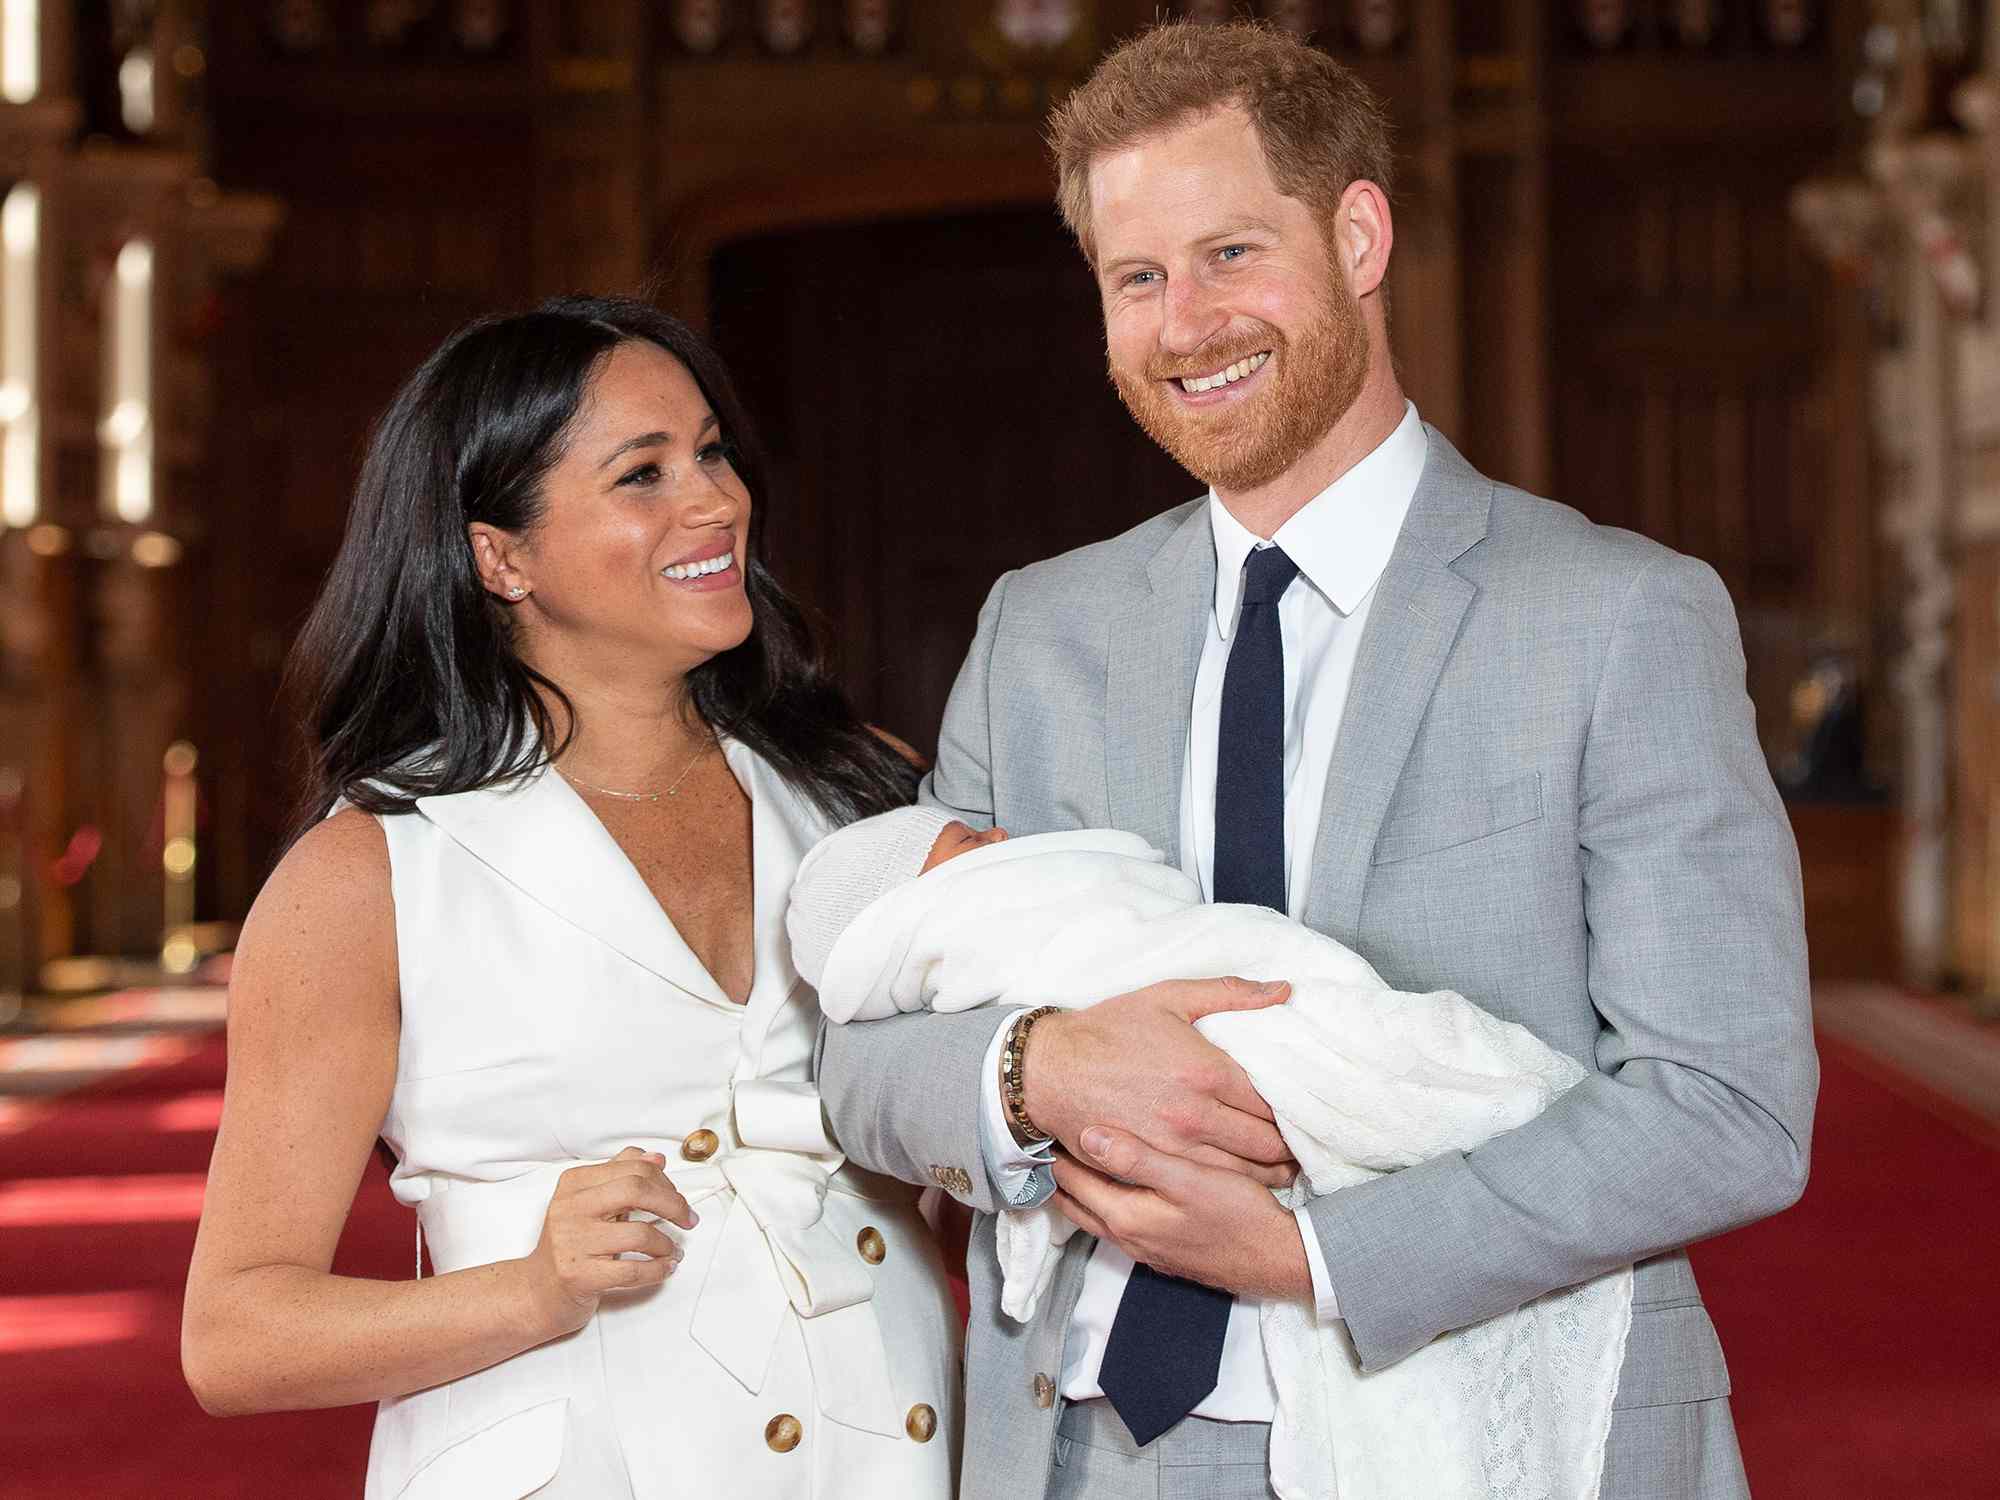 Prince Harry, Duke of Sussex and Meghan, Duchess of Sussex, pose with their newborn son Archie Harrison Mountbatten-Windsor